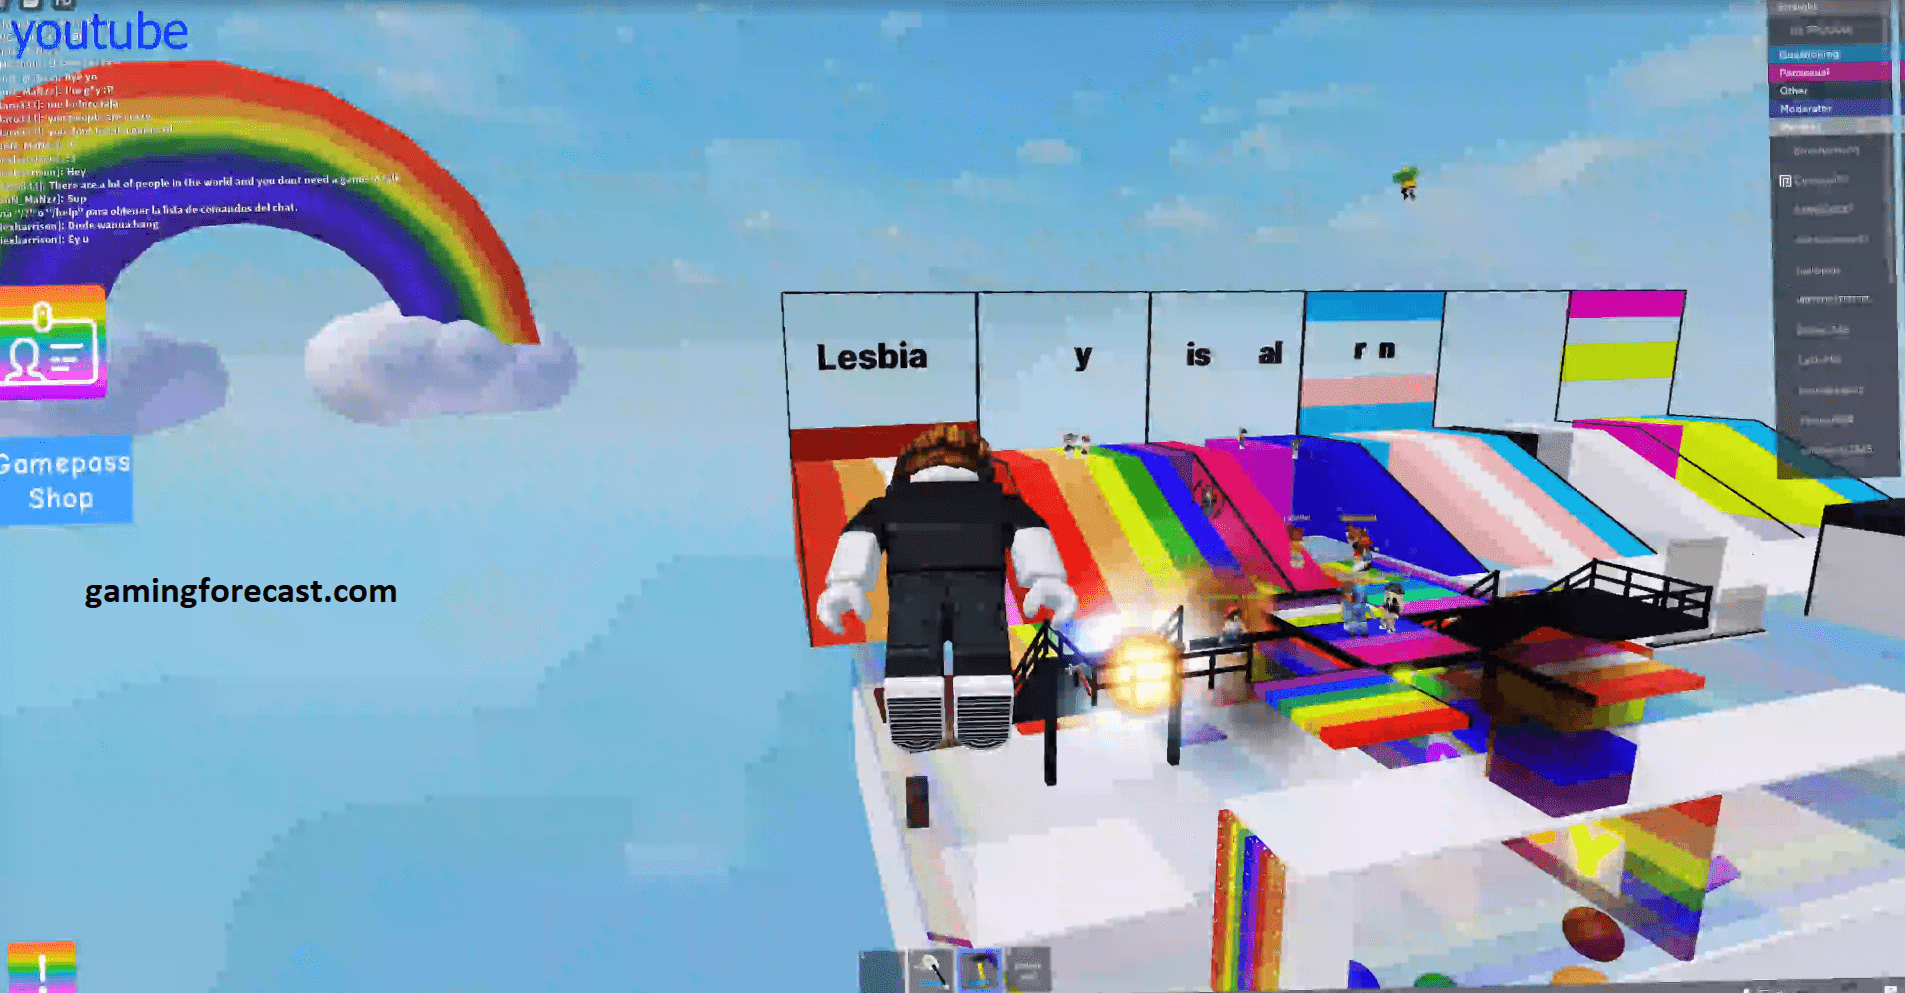 Roblox Hack Download Pc Destroy Lobby Fly Aimbot Scripts 2021 Gaming Forecast Download Free Online Game Hacks - roblox cheat